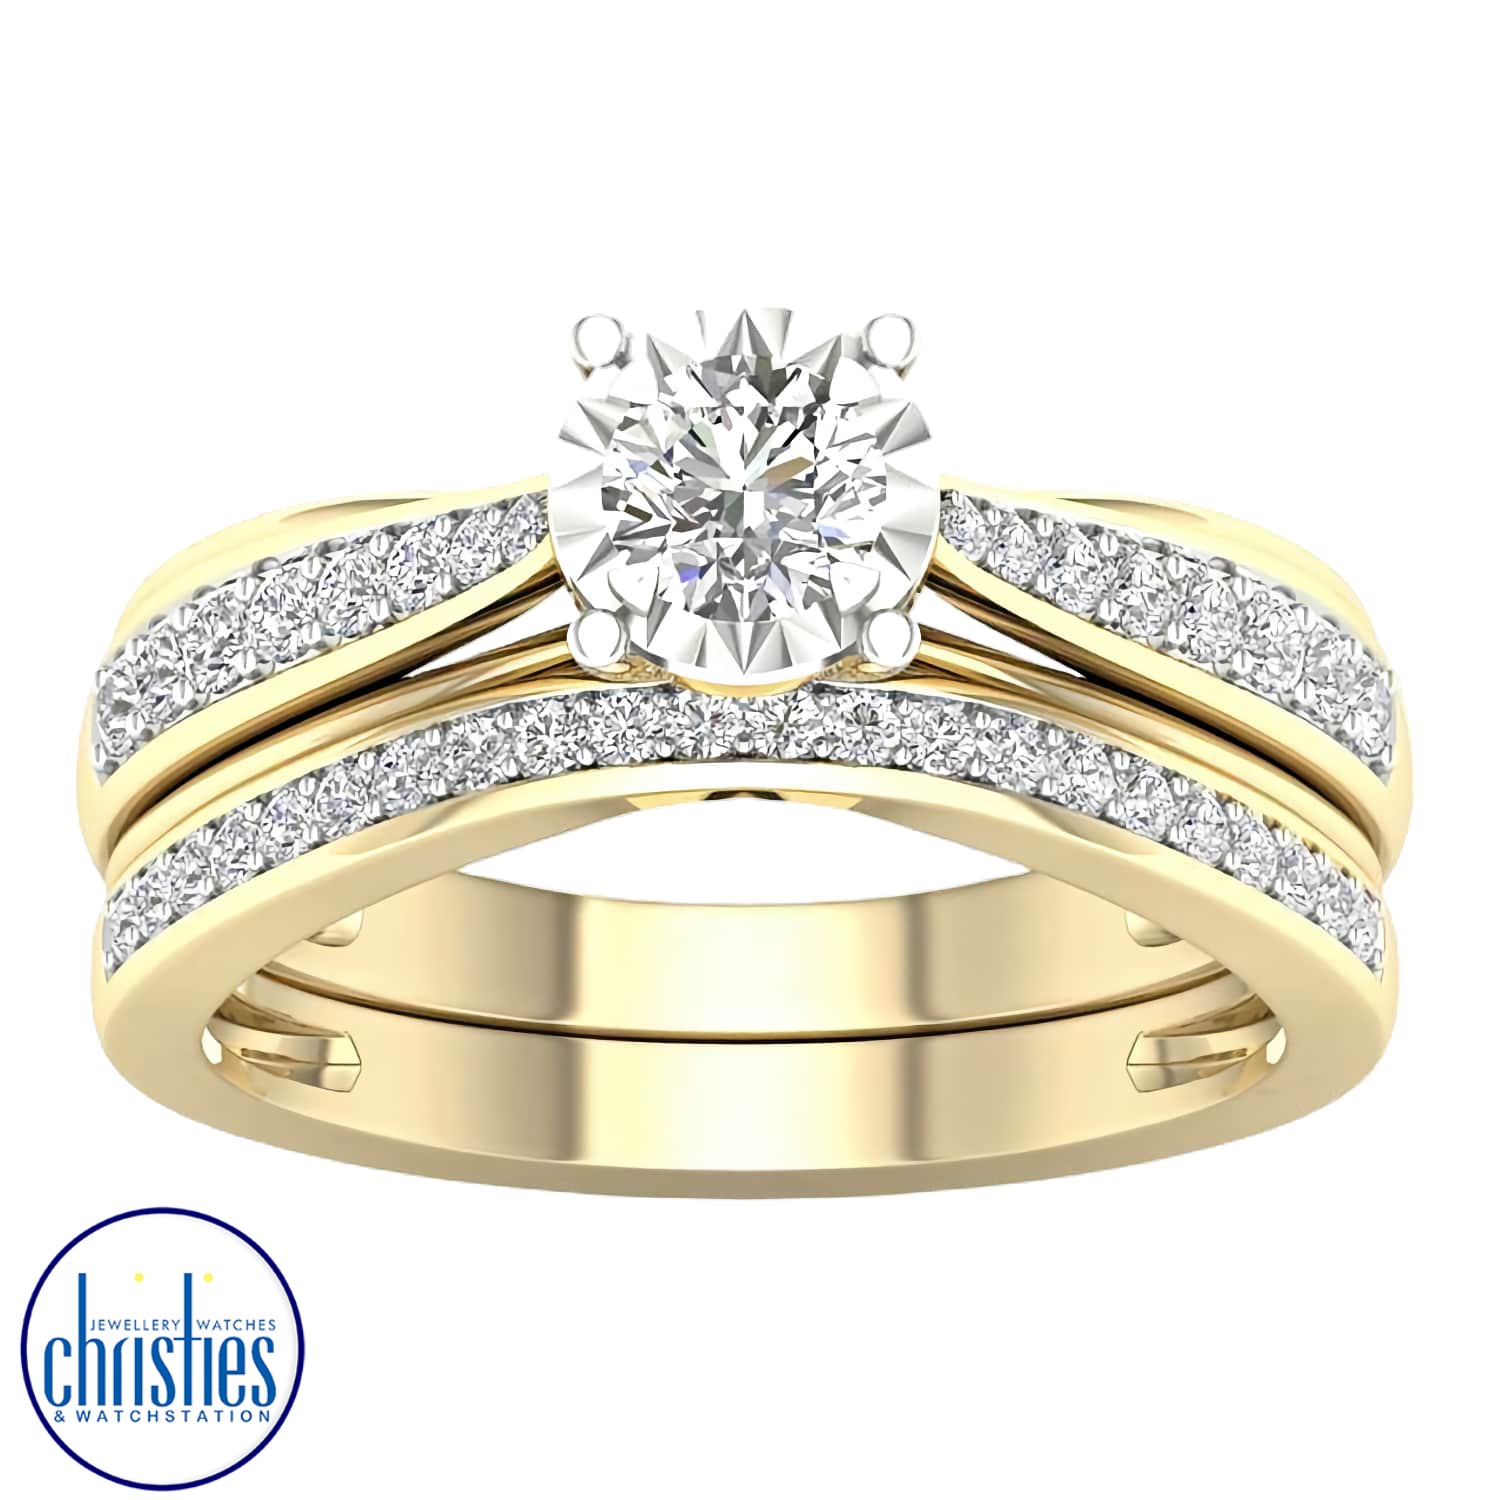 9ct Yellow Gold Diamond Bridal Ring Set 0.50ct TDW RB14698. A 9ct Yellow Gold Diamond Bridal Ring Set 0.50ct TDW Humm - Buy ‘Big things over $1000’ - Get approved online or in-store for up to $10,000. Depending on what you buy repay over 6, 9, 12 months a